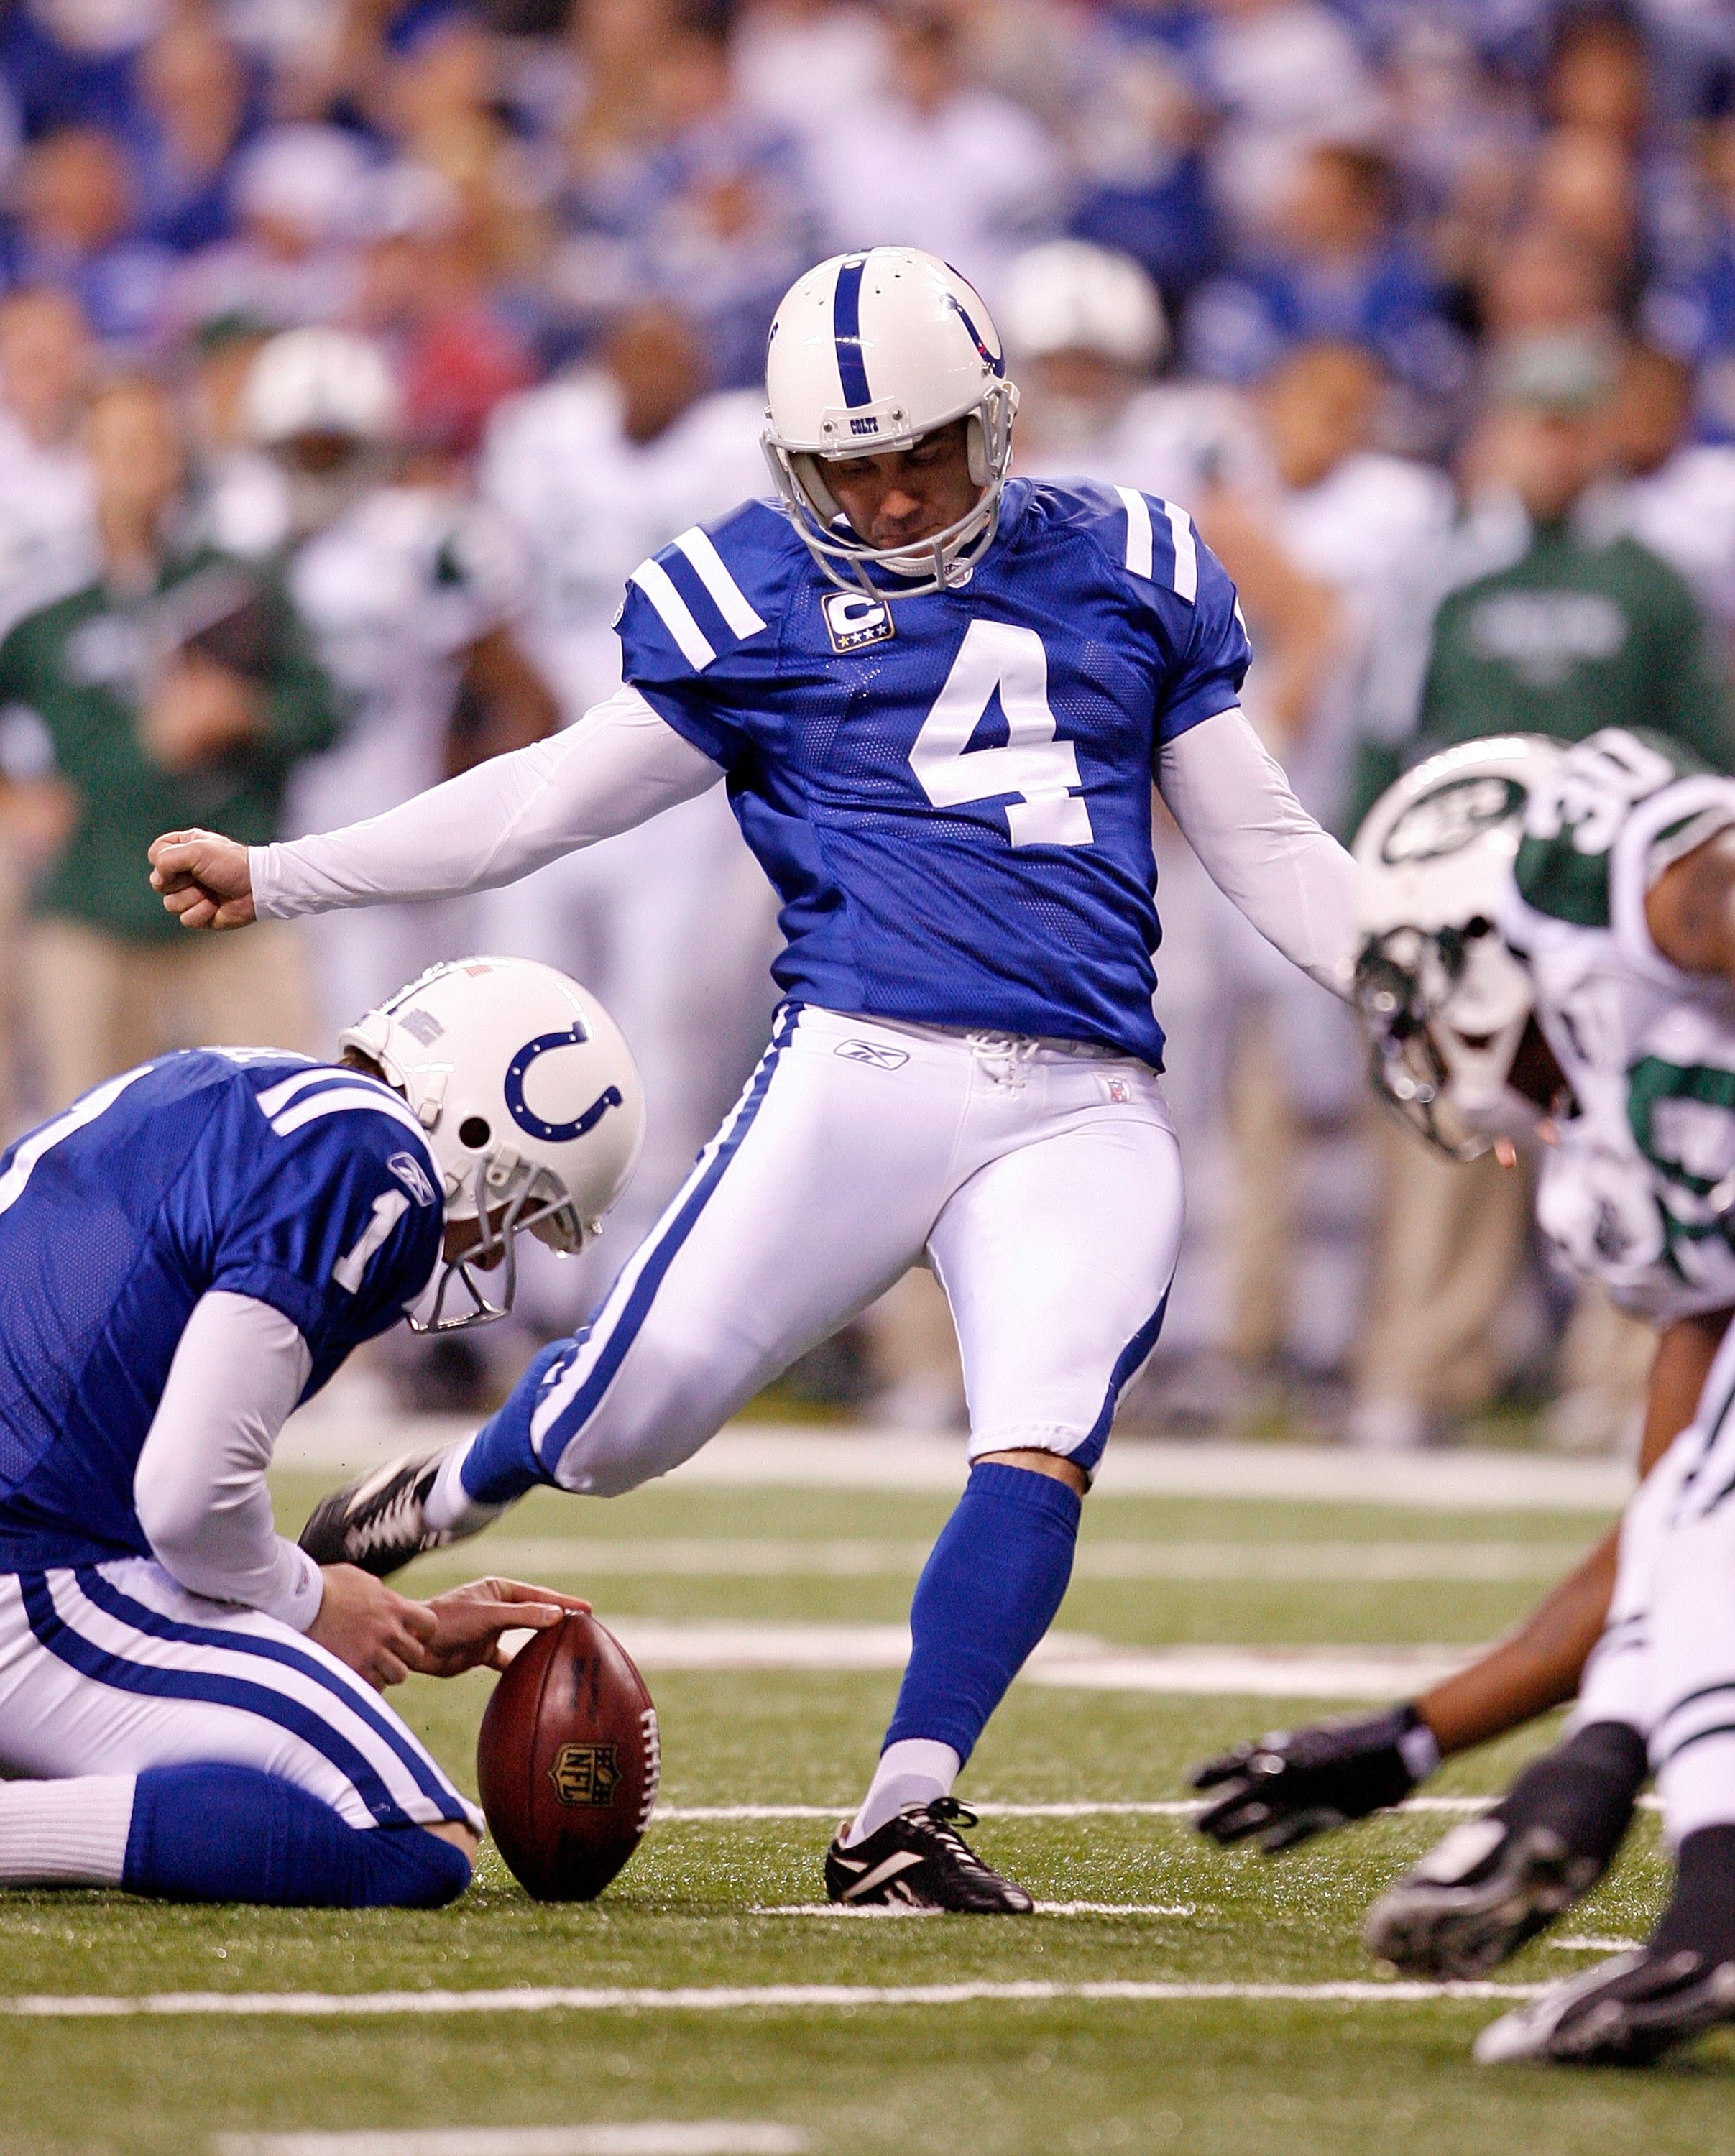 INDIANAPOLIS - DECEMBER 27:  Adam Vinatieri #4 of the Indianapolis Colts kicks a field goal during the NFL game against the New York Jets at Lucas Oil Stadium on December 27, 2009 in Indianapolis, Indiana.  (Photo by Andy Lyons/Getty Images)